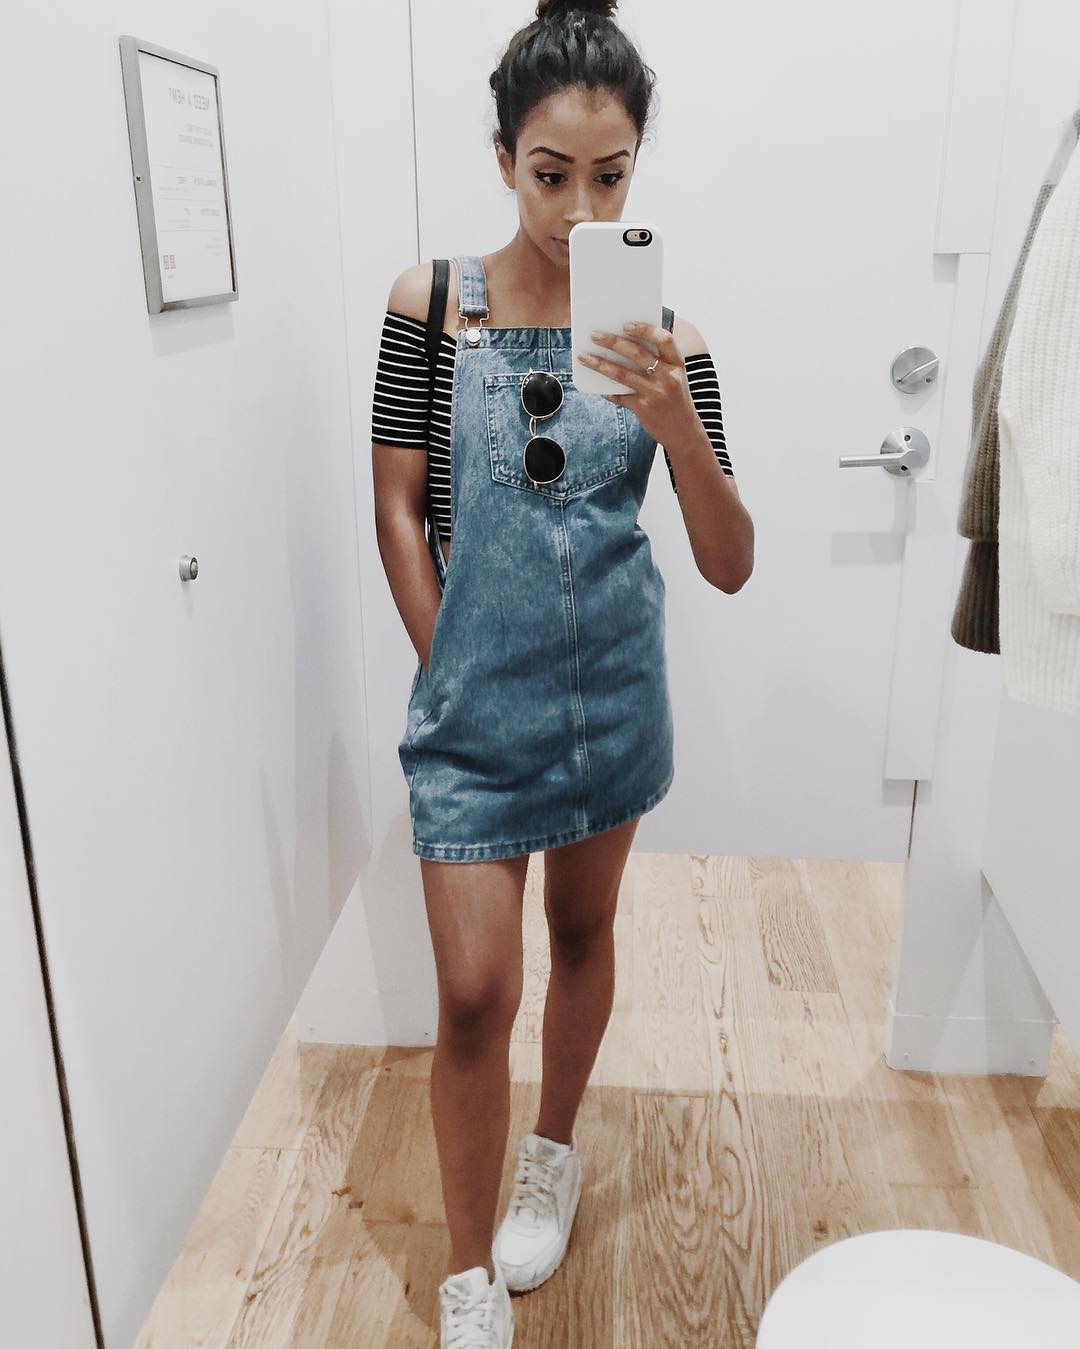 51 Sexy Liza Koshy Boobs Pictures Are A Charm For Her Fans 34